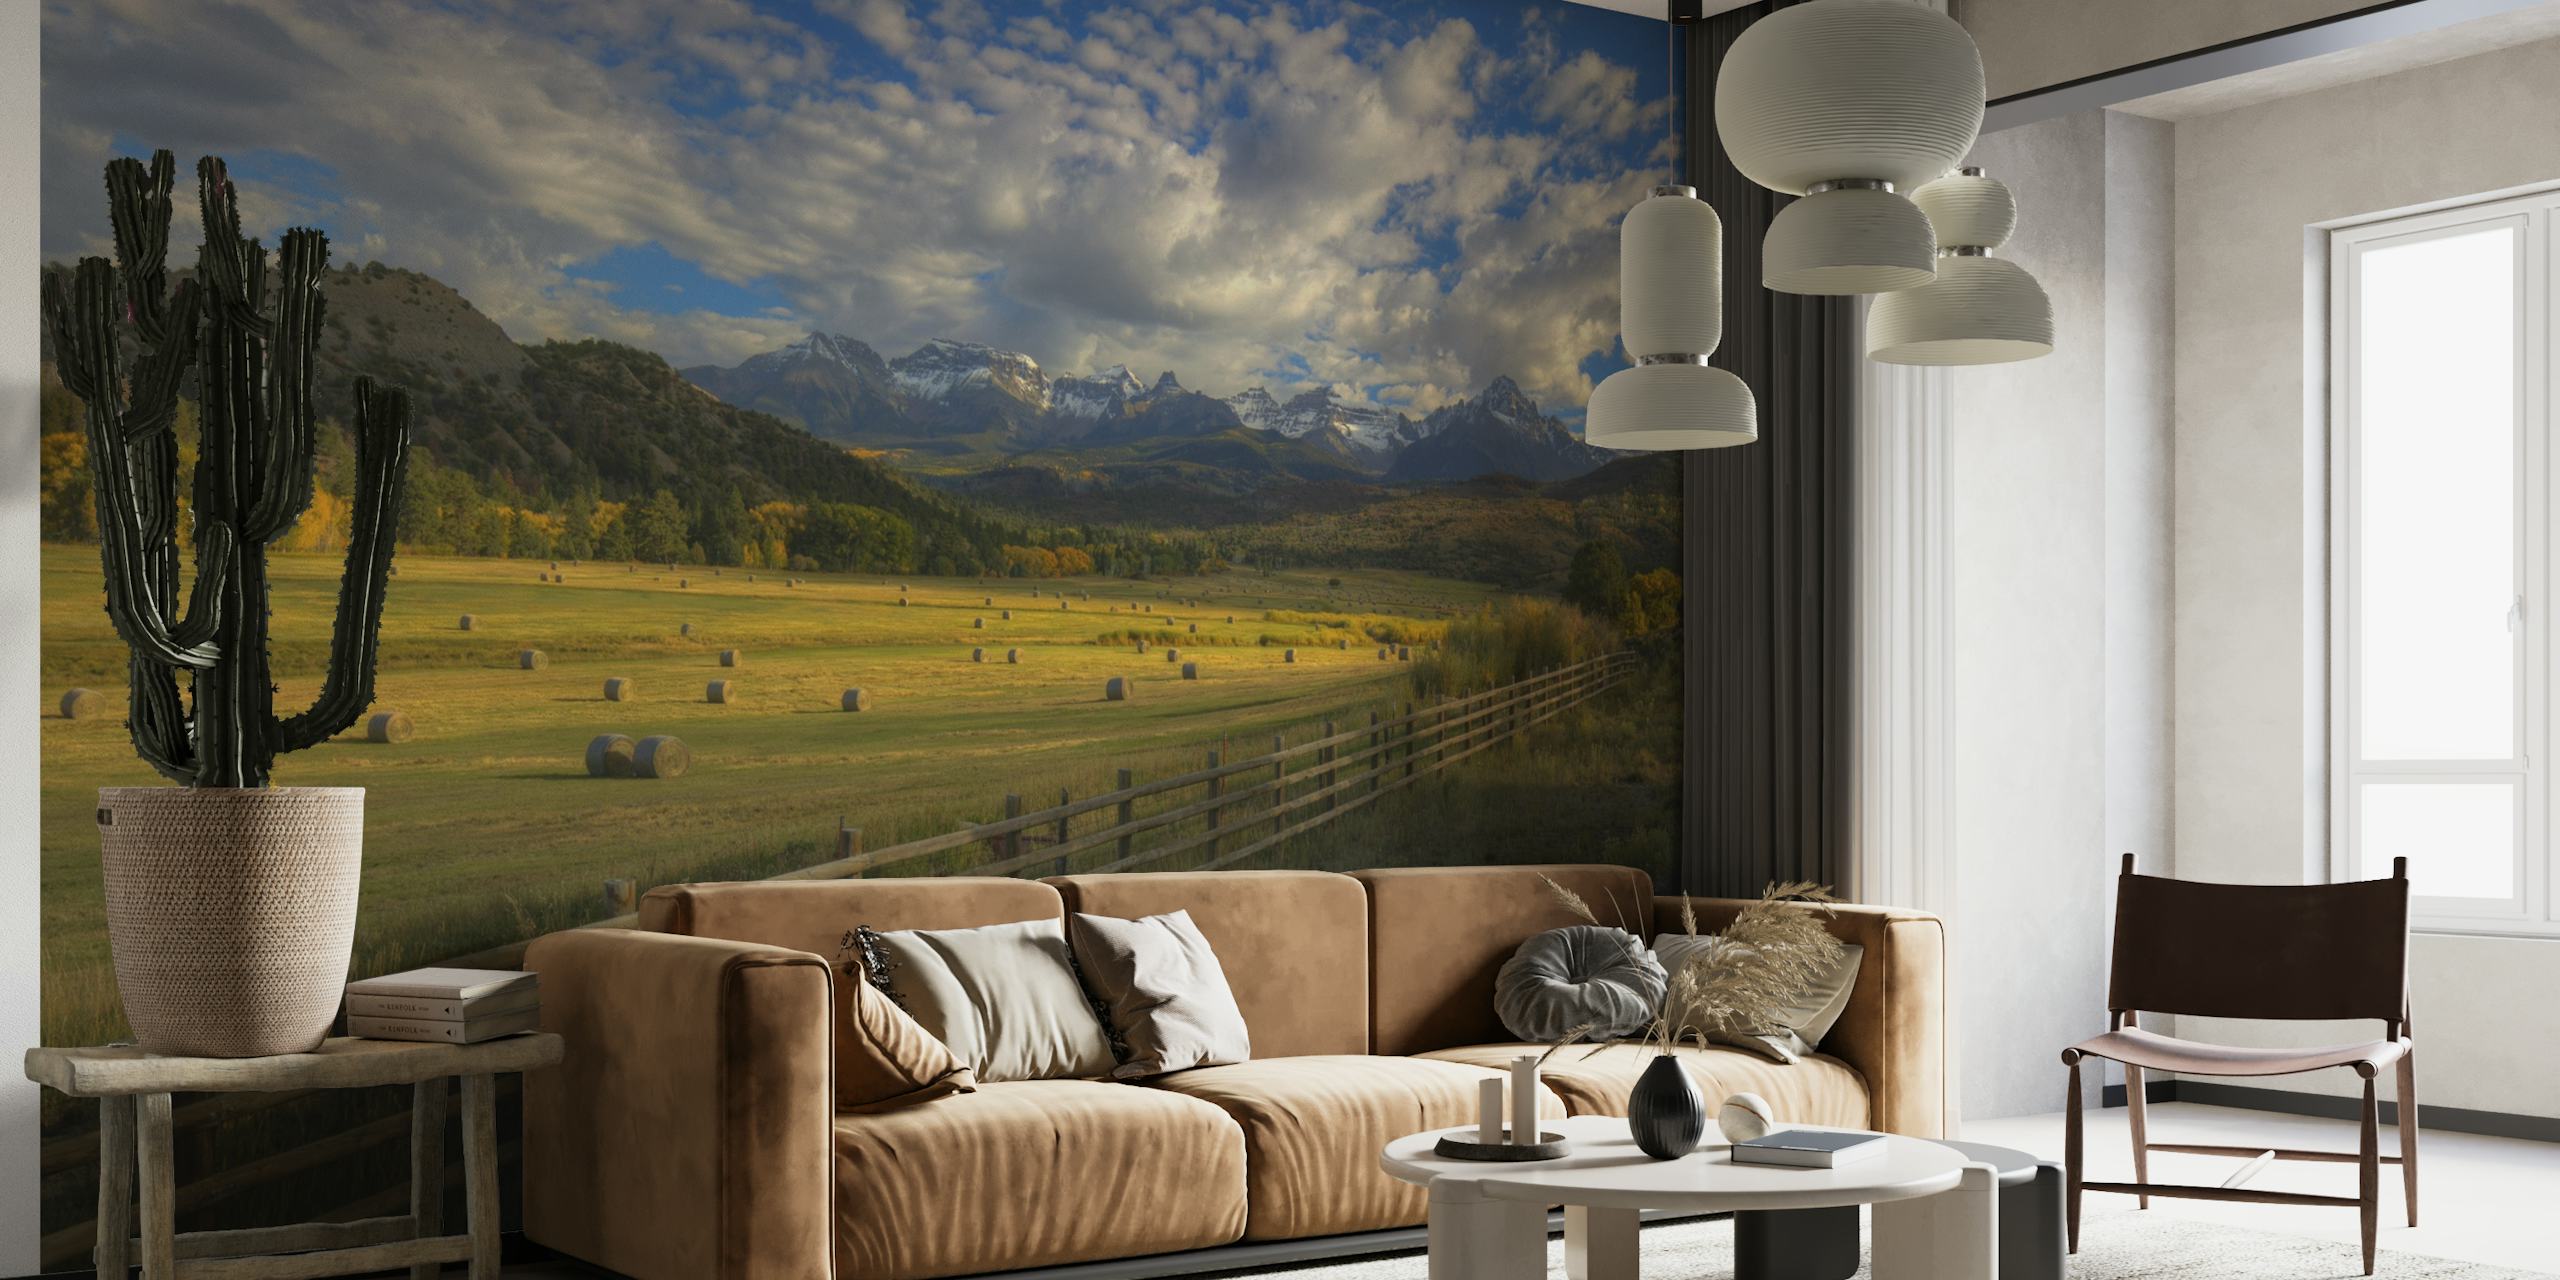 Rustic Colorado farm landscape wall mural with mountains and a wooden fence